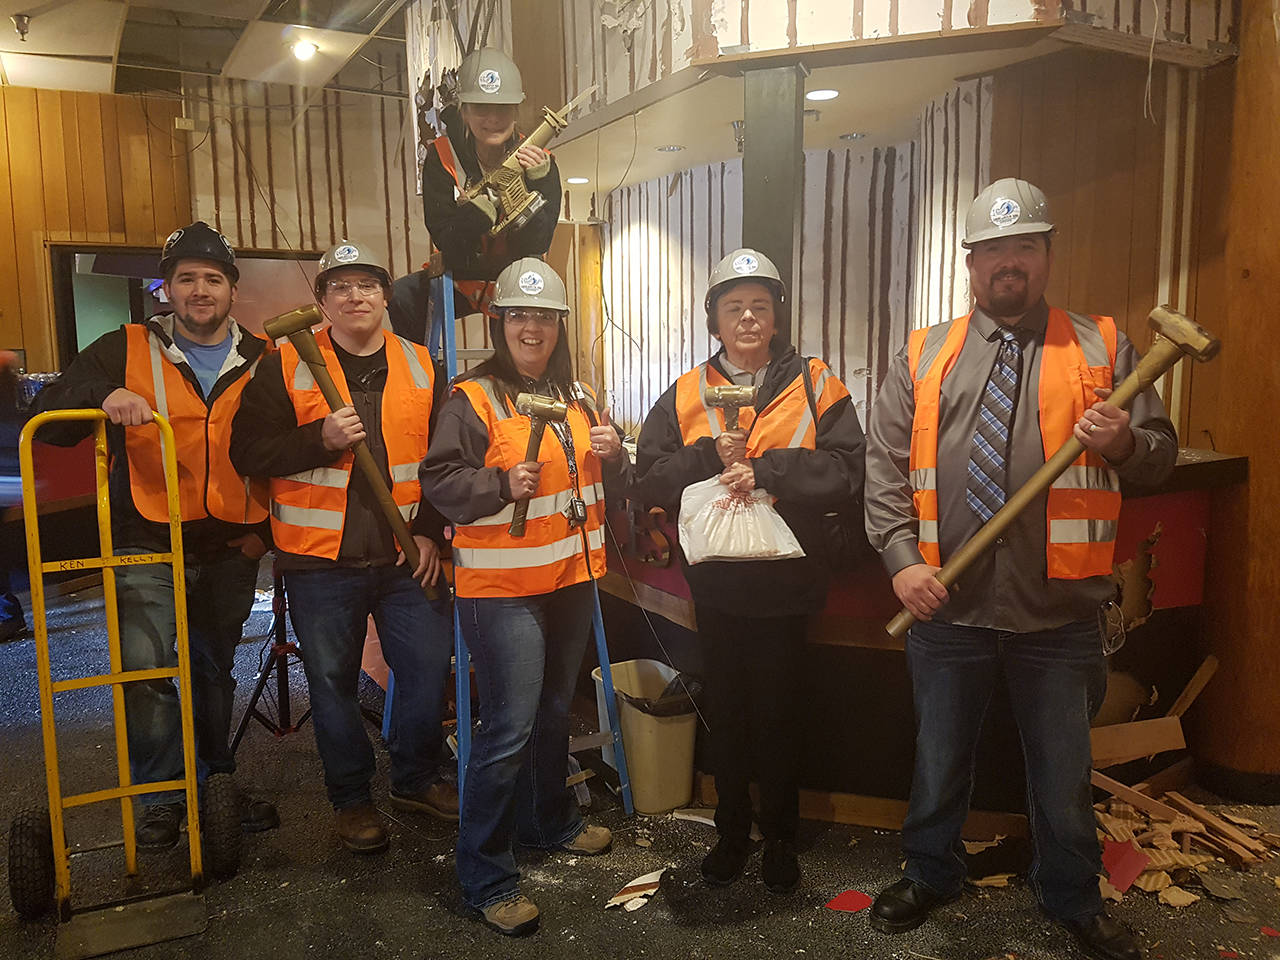 Shoalwater Bay tribal members, left to right, Joel Blake, Kenny Waltman, Mary Downs (on ladder), Jamie Judkins, Colleen Dietl, and Jacob Christensen.